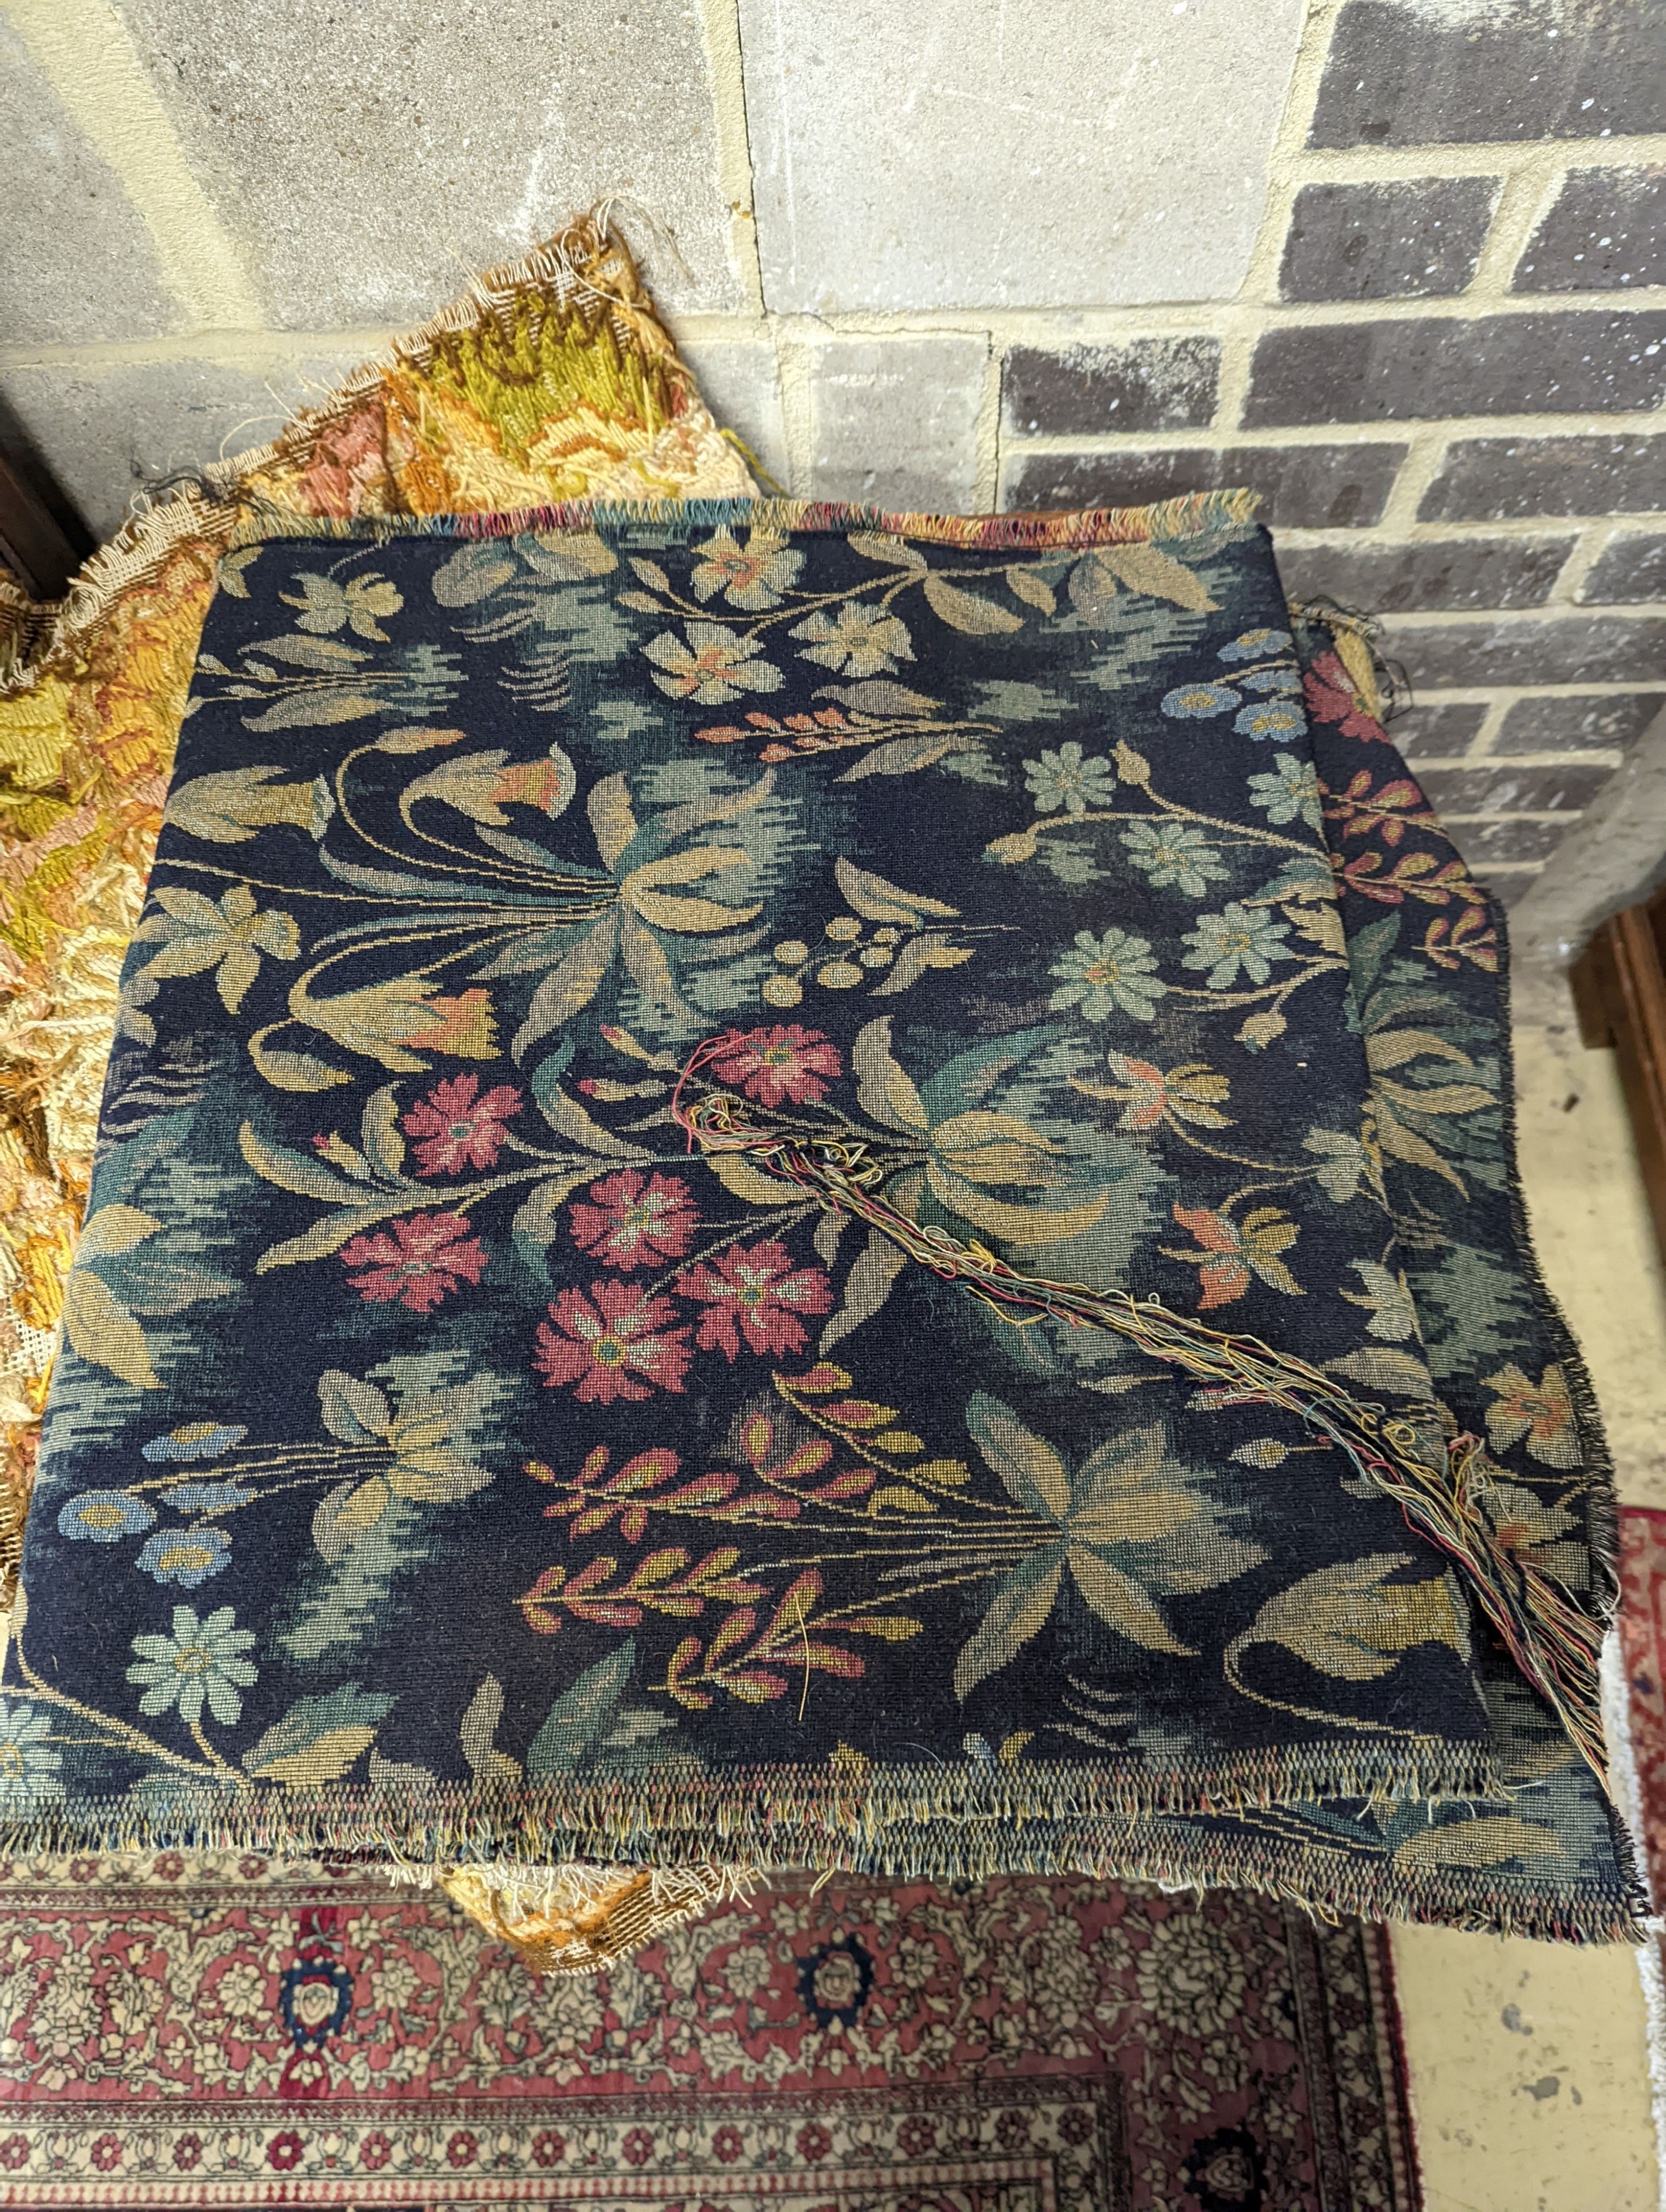 Length of machine tapestry fabric with flowers on a black ground, 420 x 52cm together with a Caucasian rug faced cushion and an antique English needlework panel with stylised scrolls 175 x 67cm